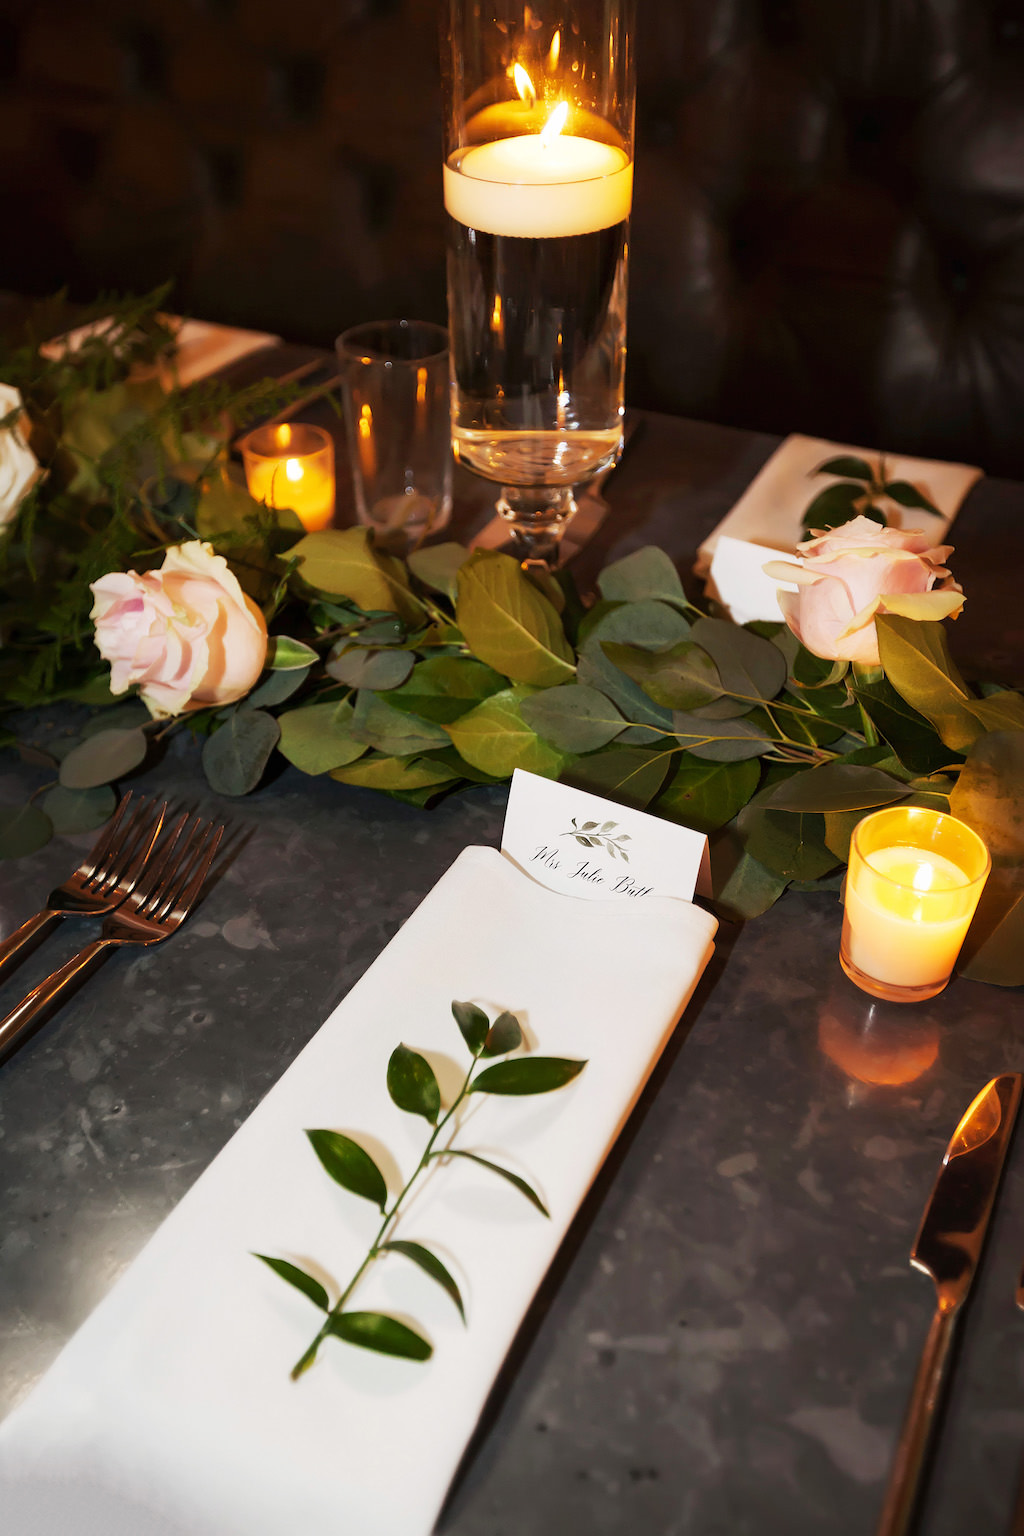 Modern Industrial Chic Wedding Reception Table Decor with White Linen, Printed Place Card, Pink Rose and Greenery Garland Centerpiece, and Floating Votive Candles in Glass Cylinder